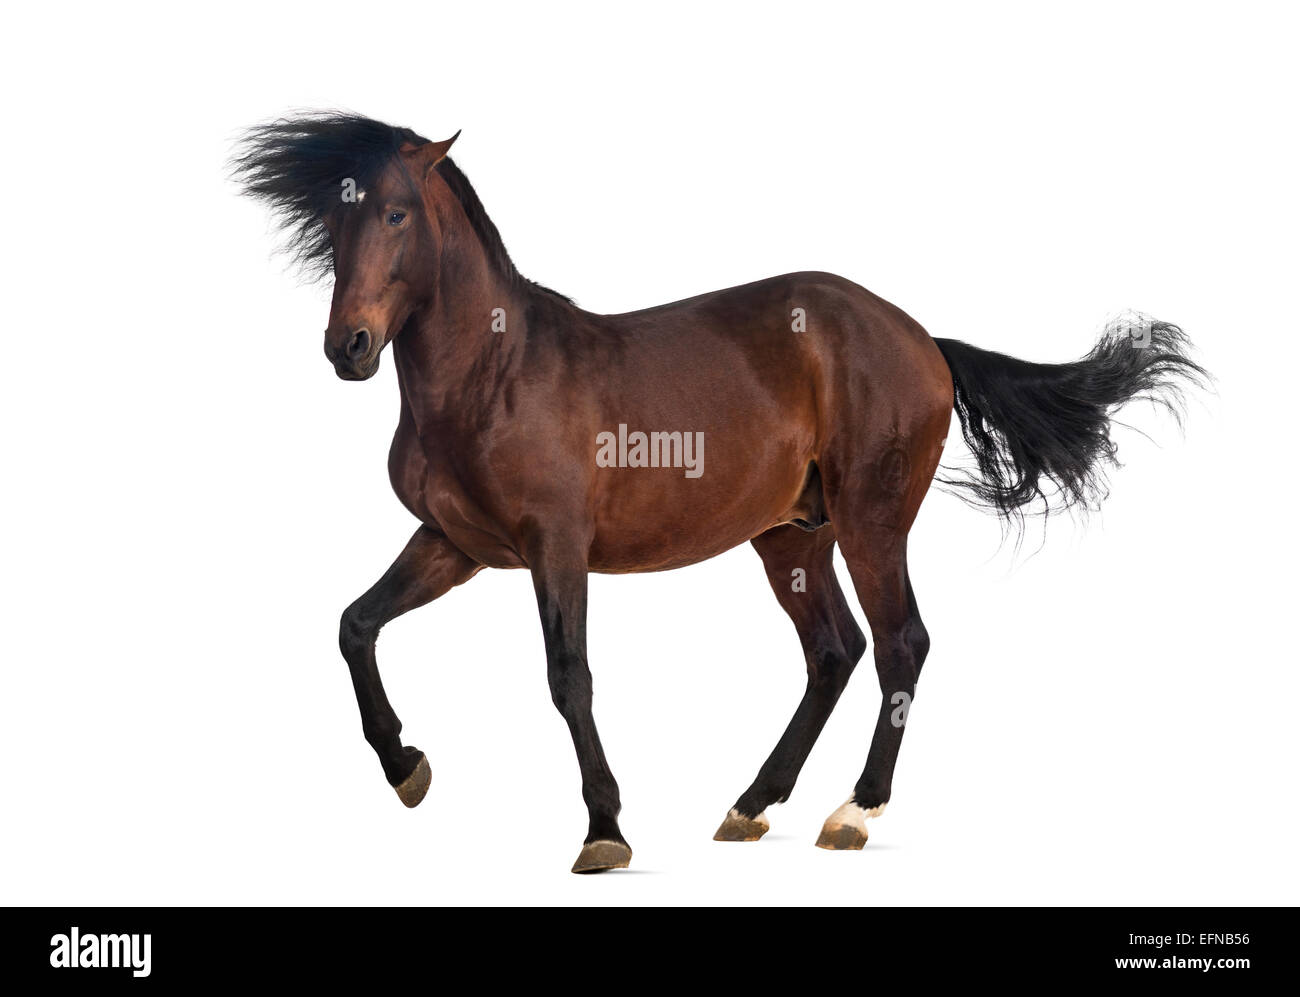 Andalusian horse trotting against white background Stock Photo